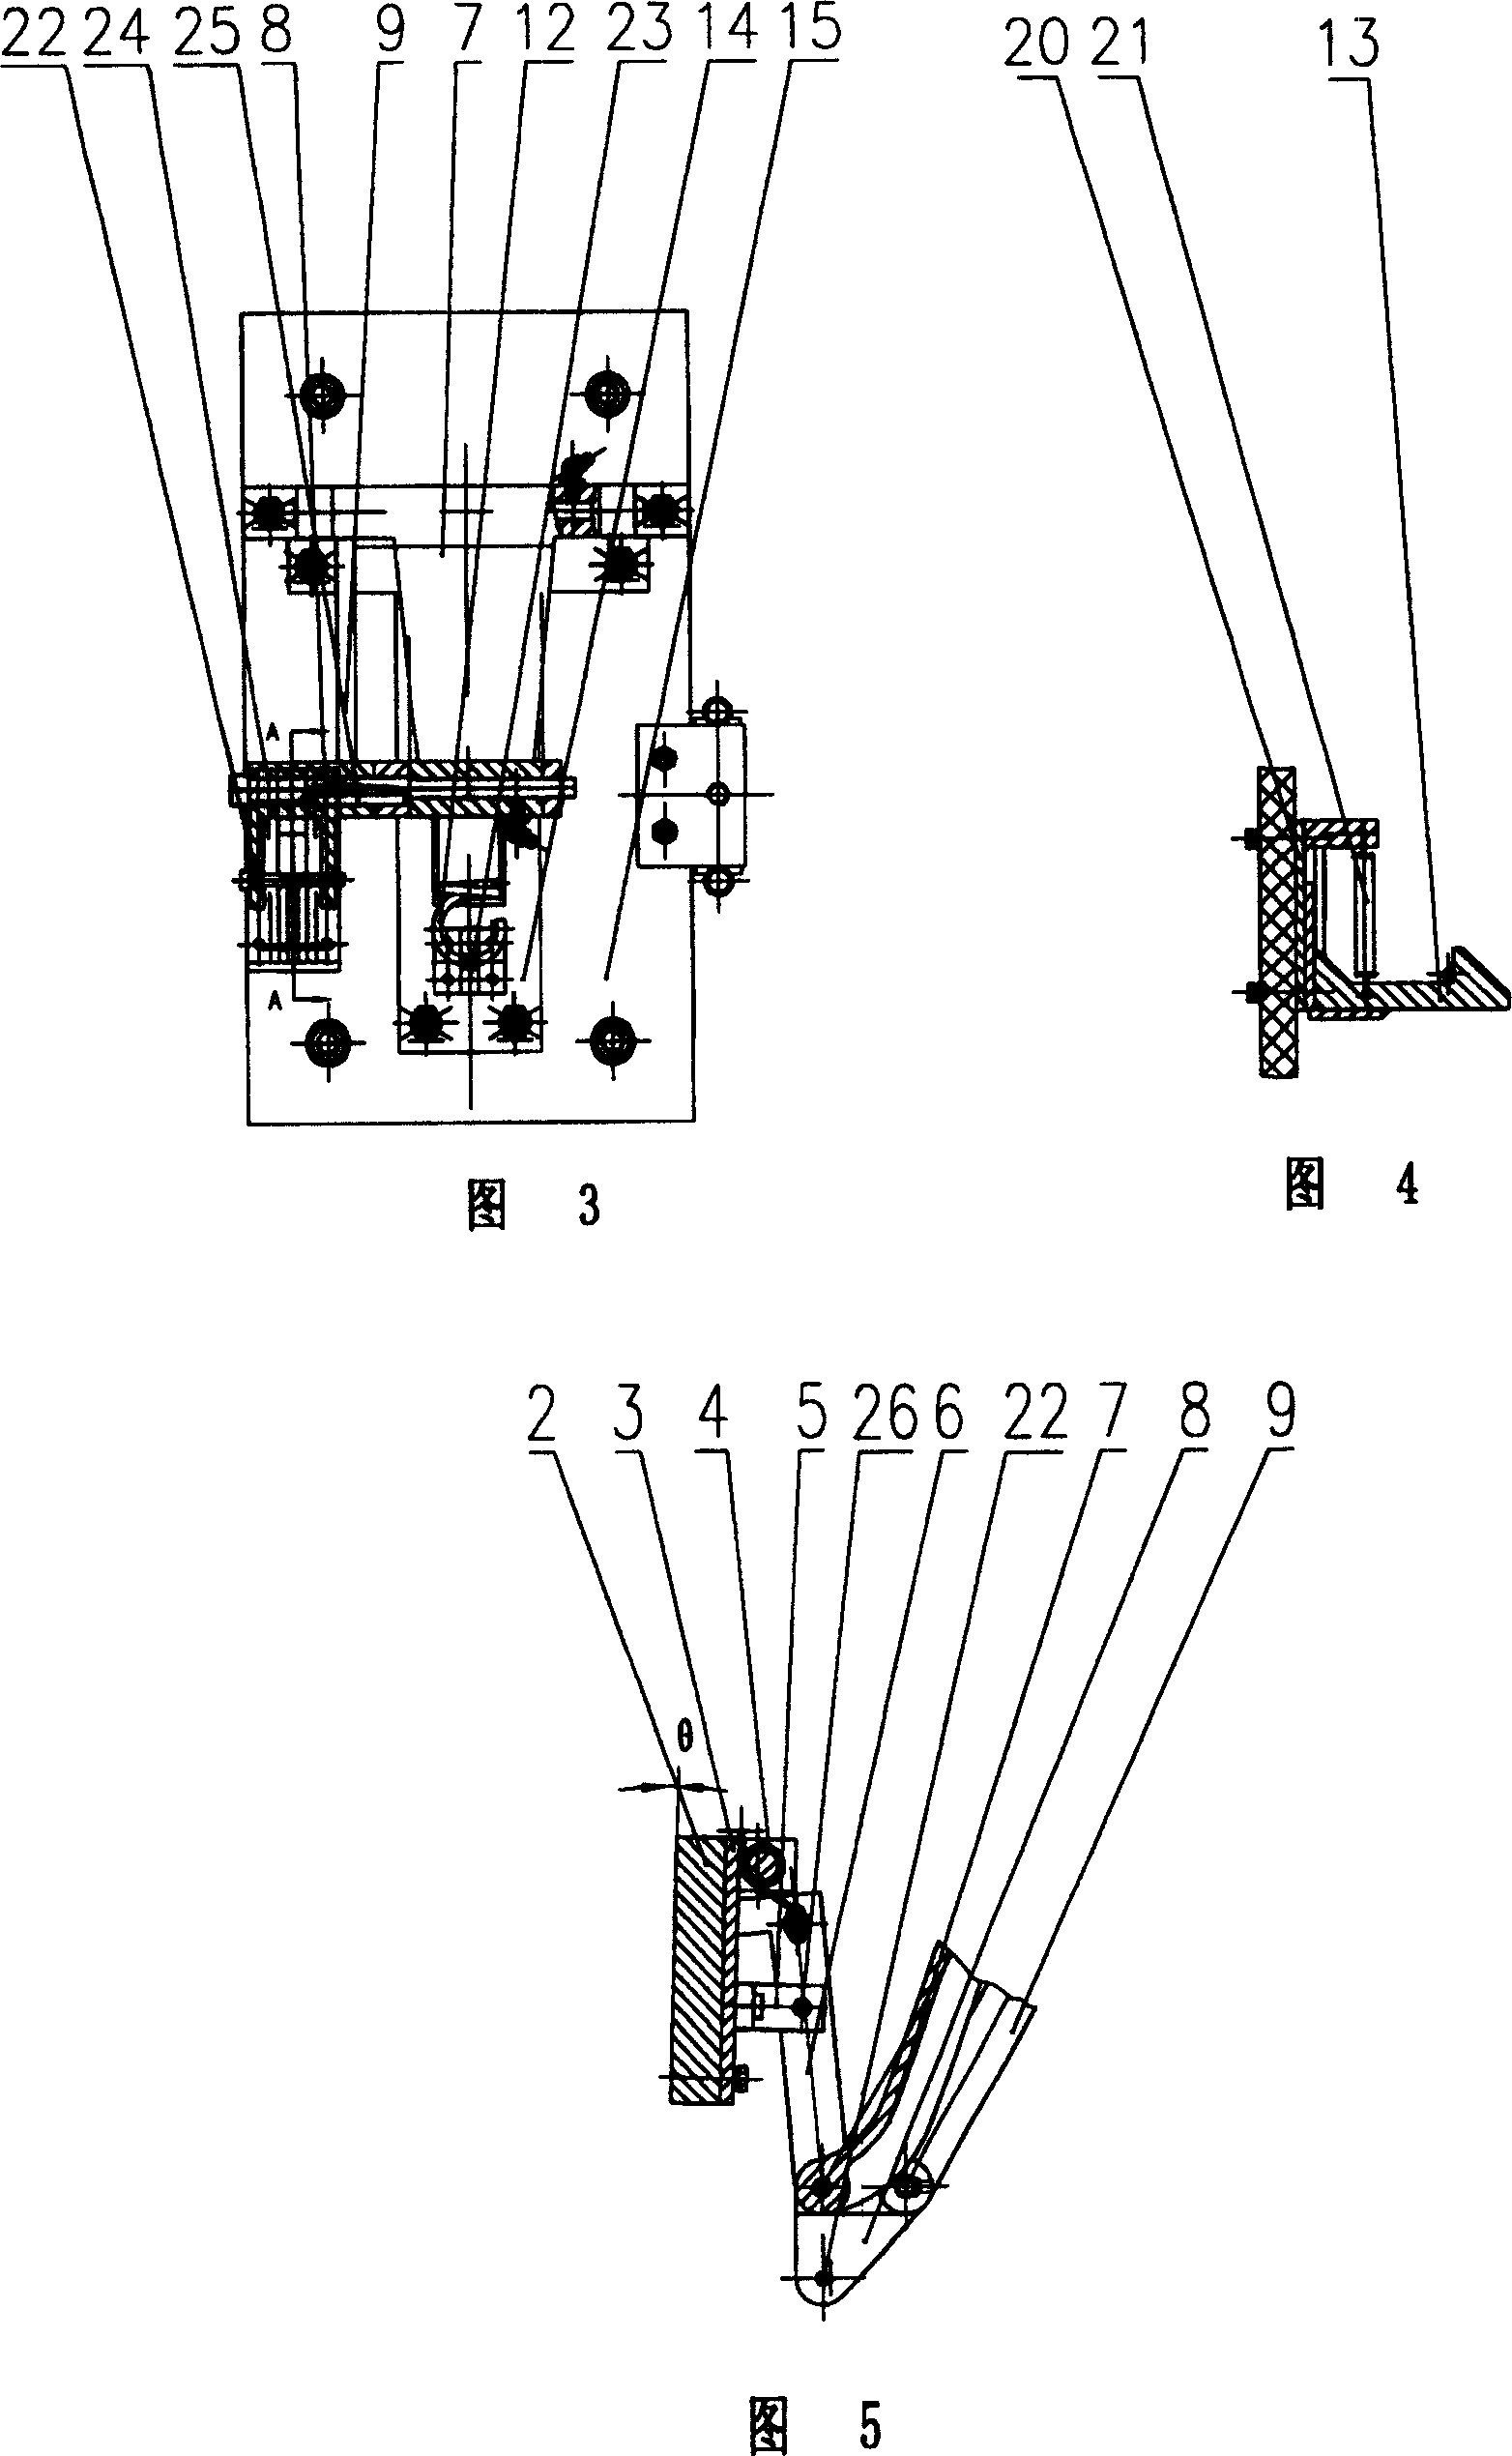 Lateral current collector